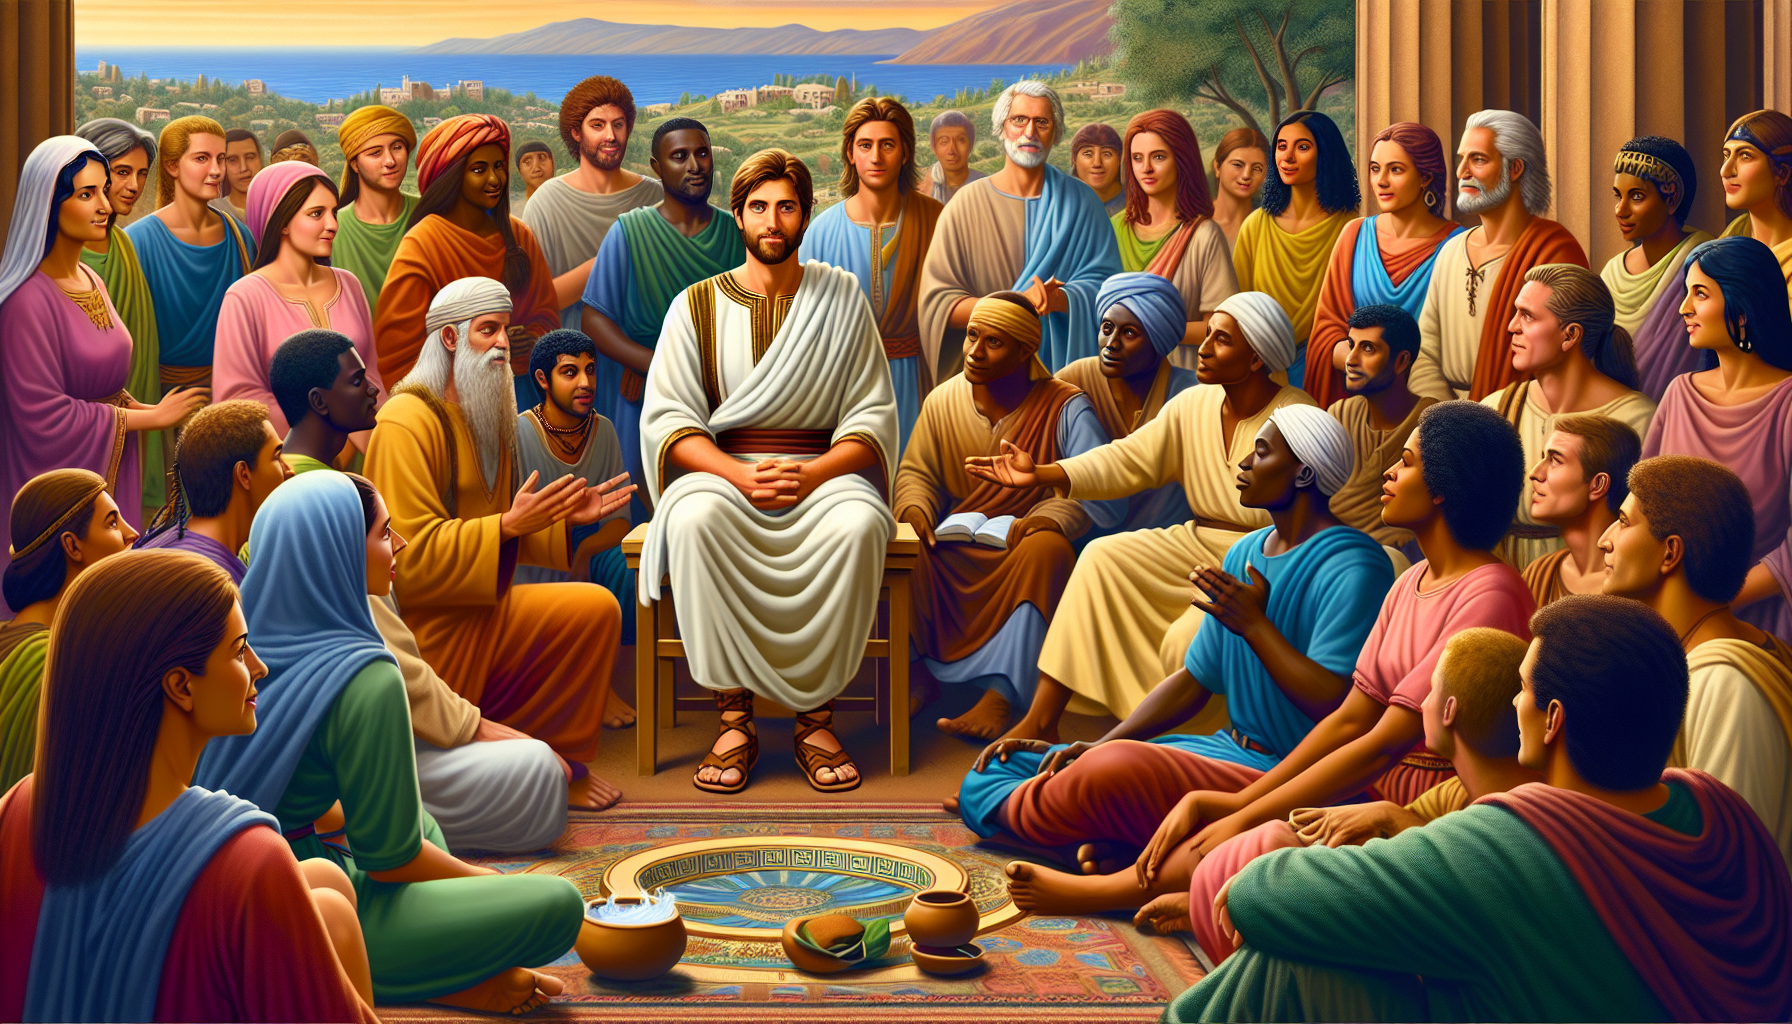 Create an image of a diverse group of people gathered around Jesus, each person speaking a different language representing the linguistic diversity of the world during Jesus' time. Jesus is depicted a